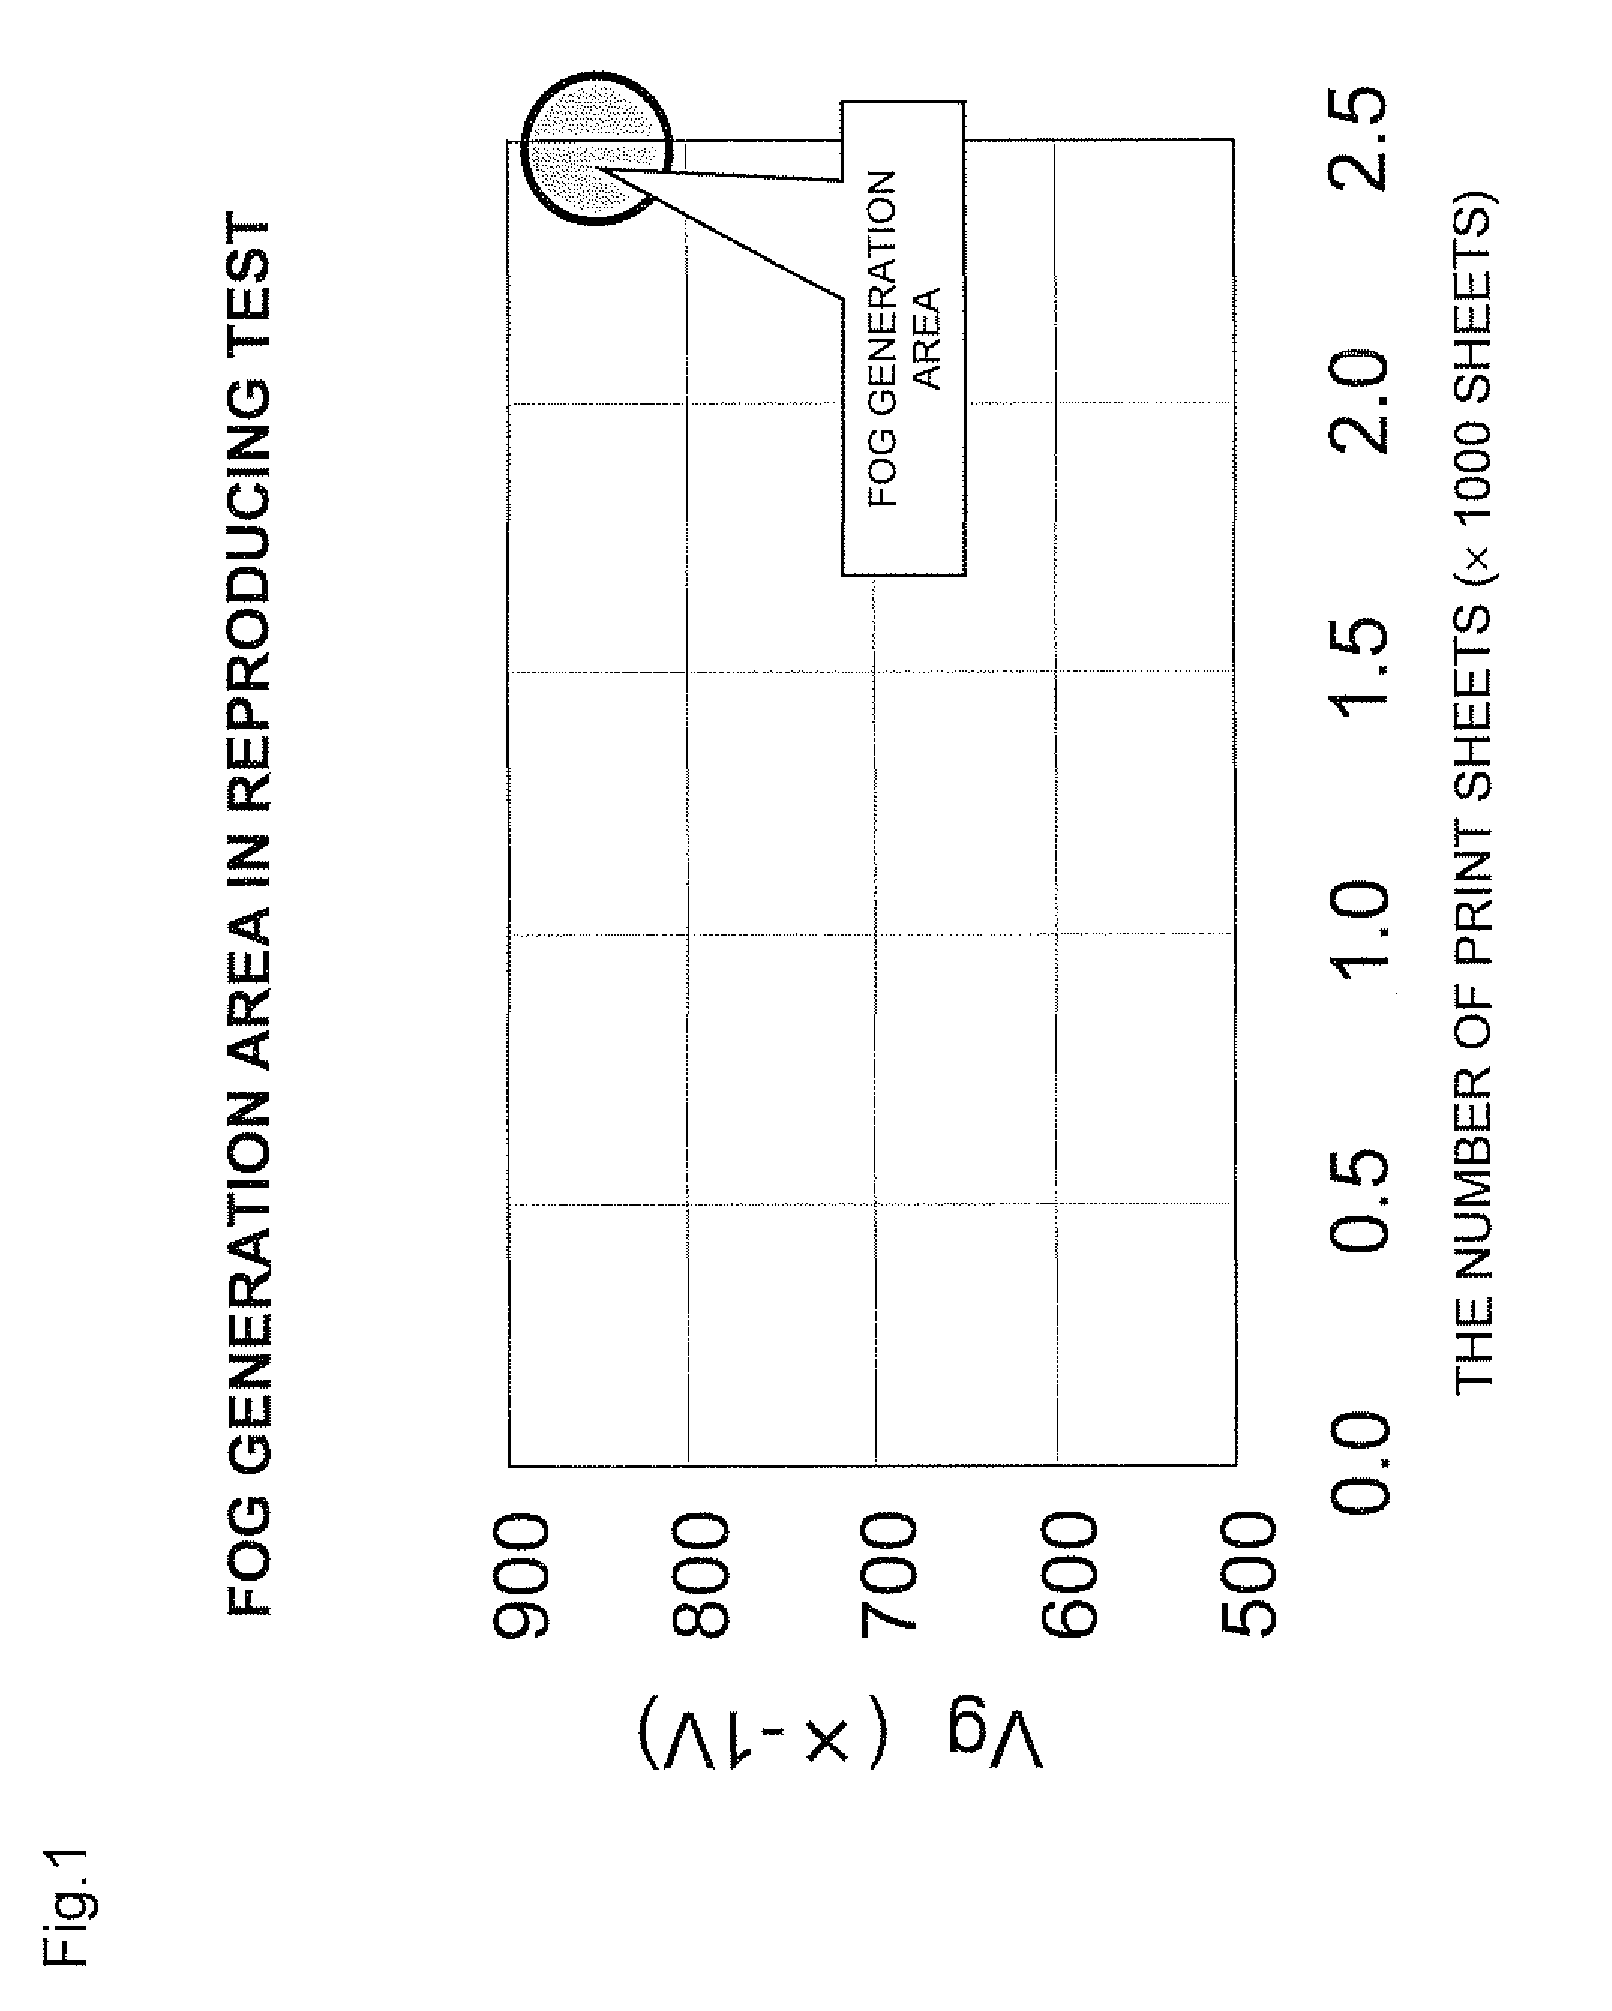 Image forming apparatus with variable photoconductor charging and variable developing bias voltage